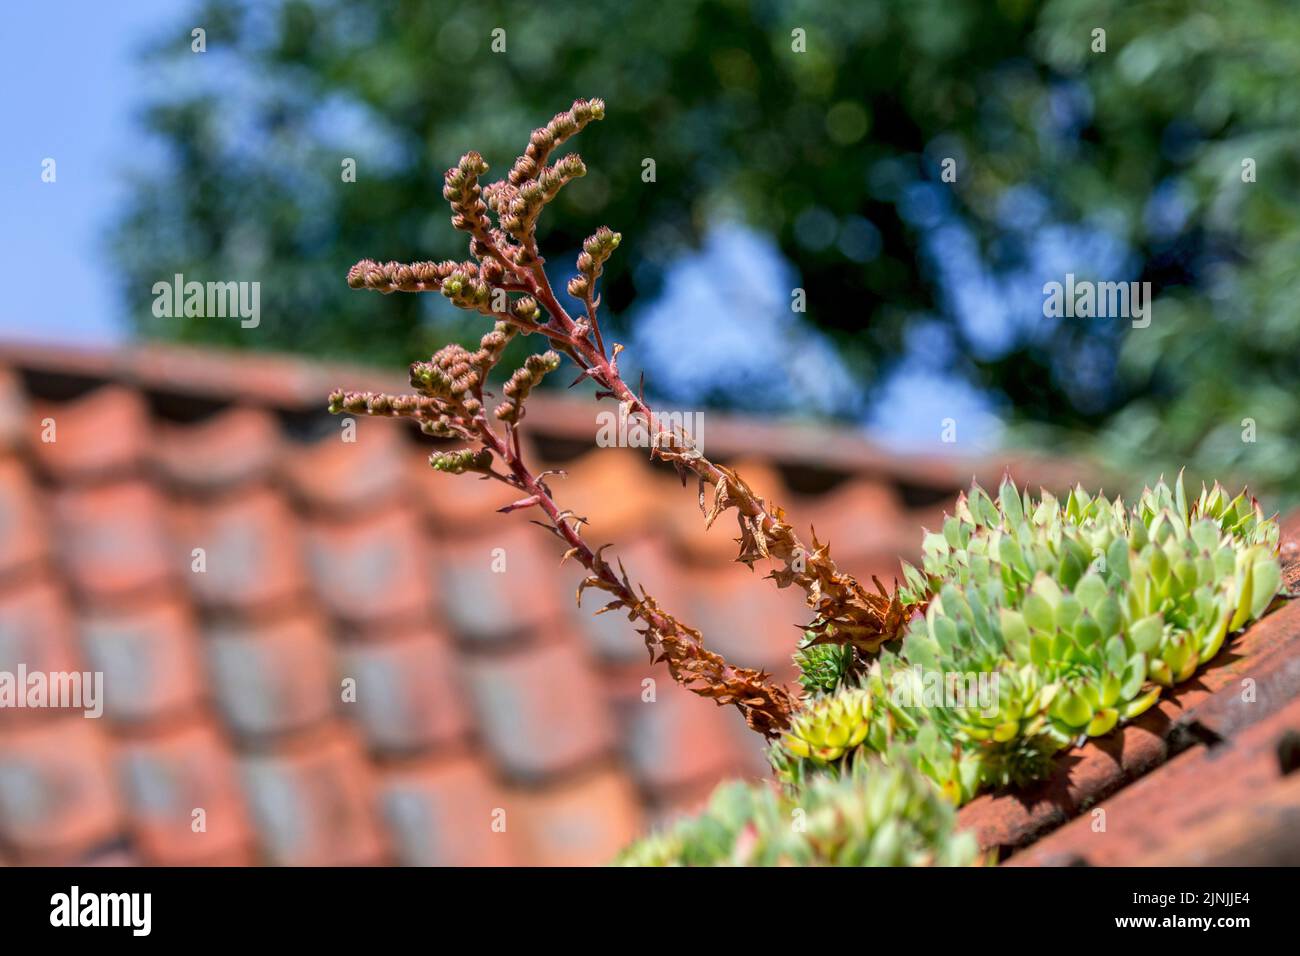 Common houseleek (Sempervivum tectorum) growing on old house roof with red roofing tiles, traditionally to protect buildings against lightning strikes Stock Photo